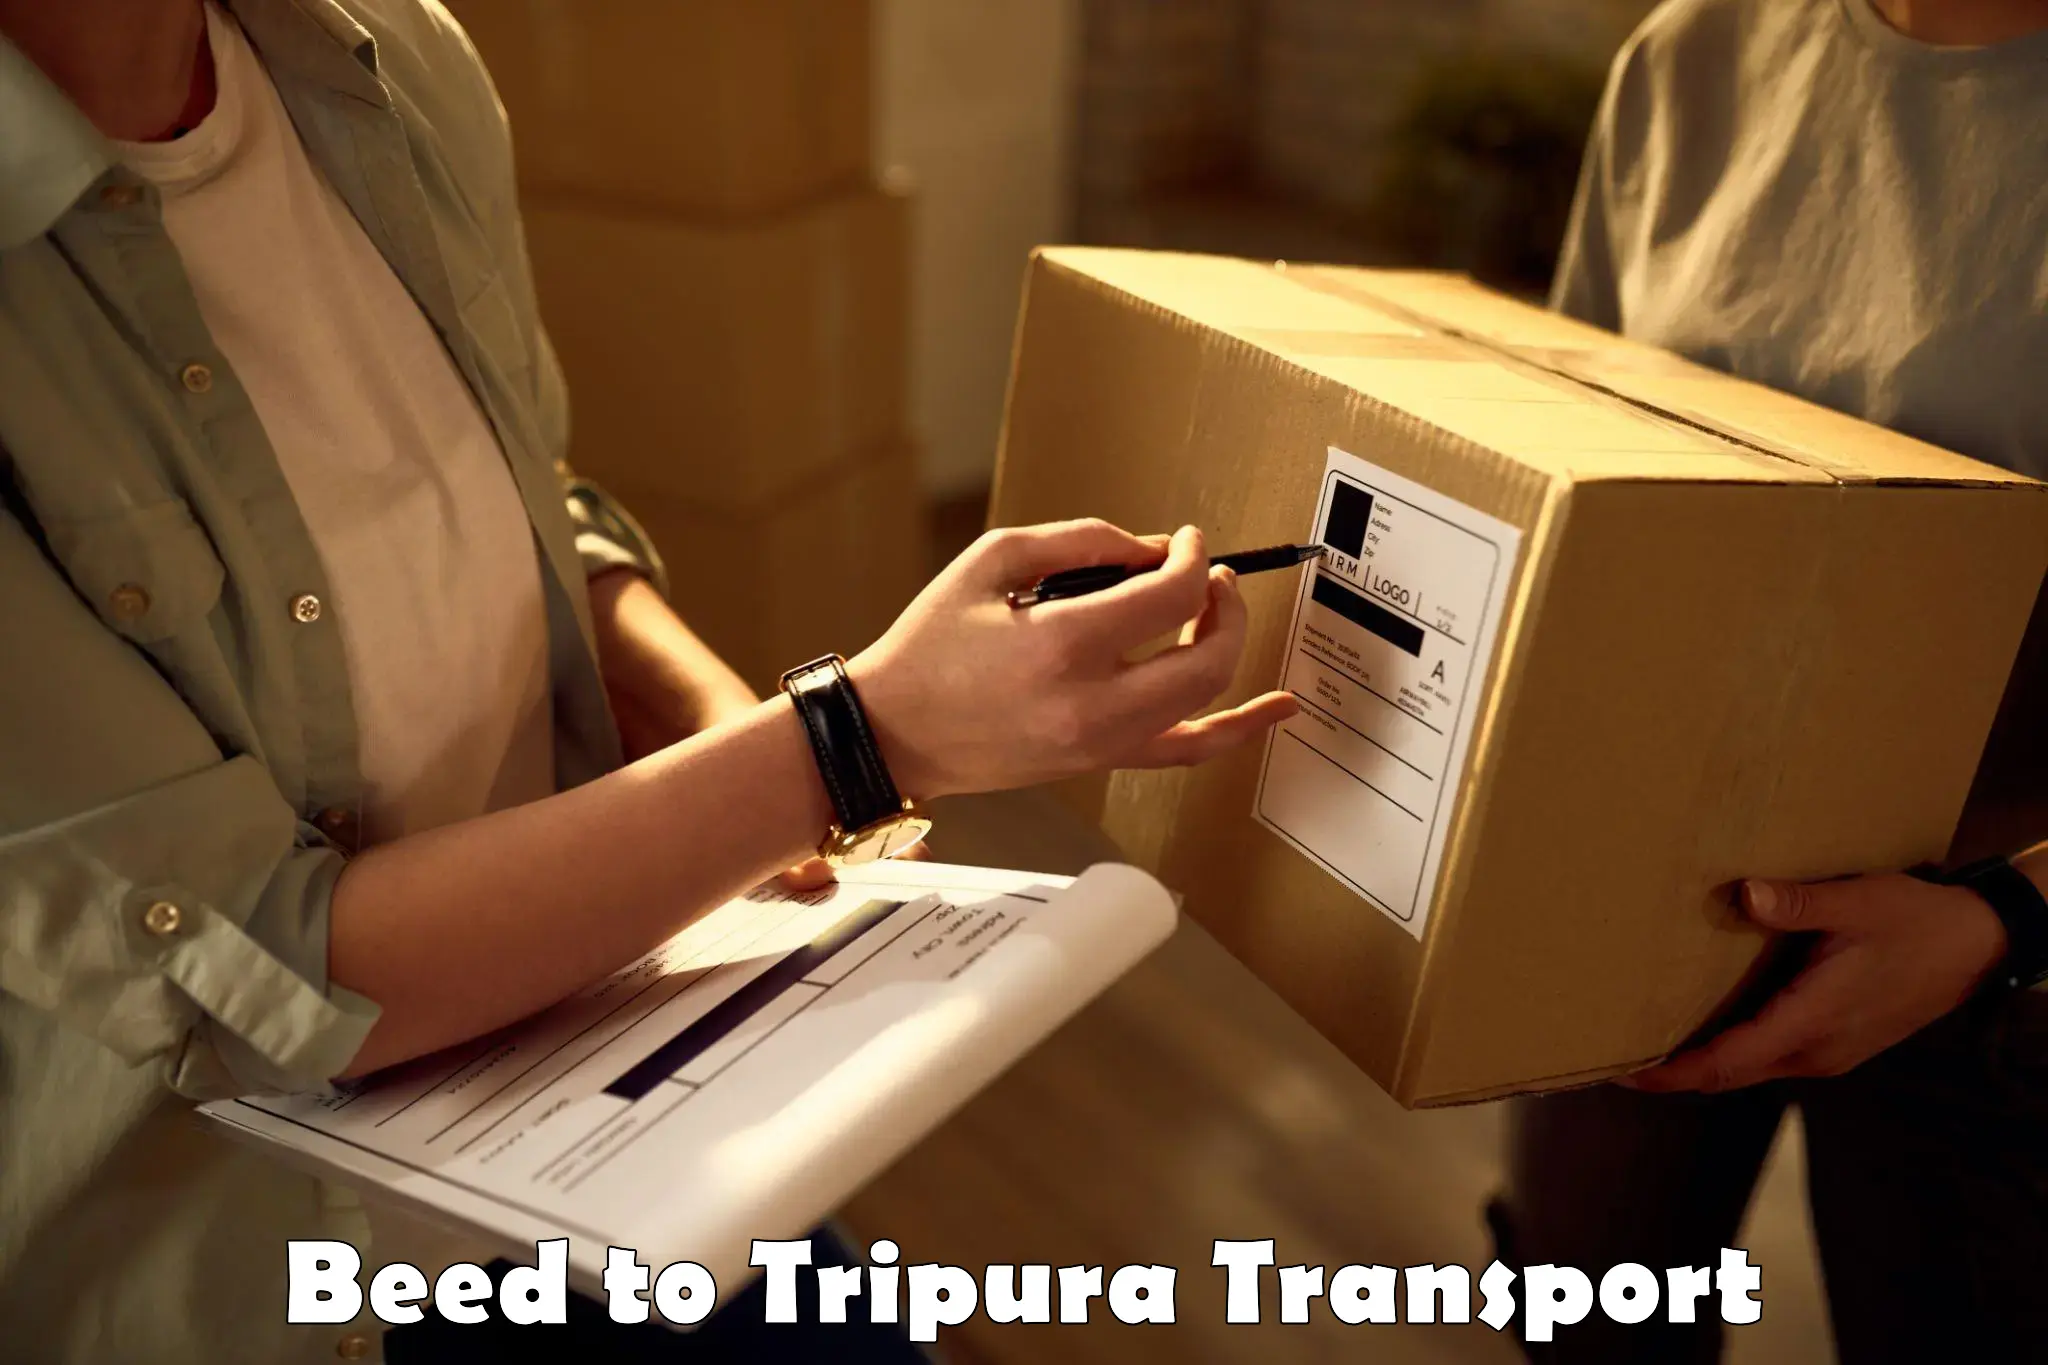 Daily transport service Beed to Tripura